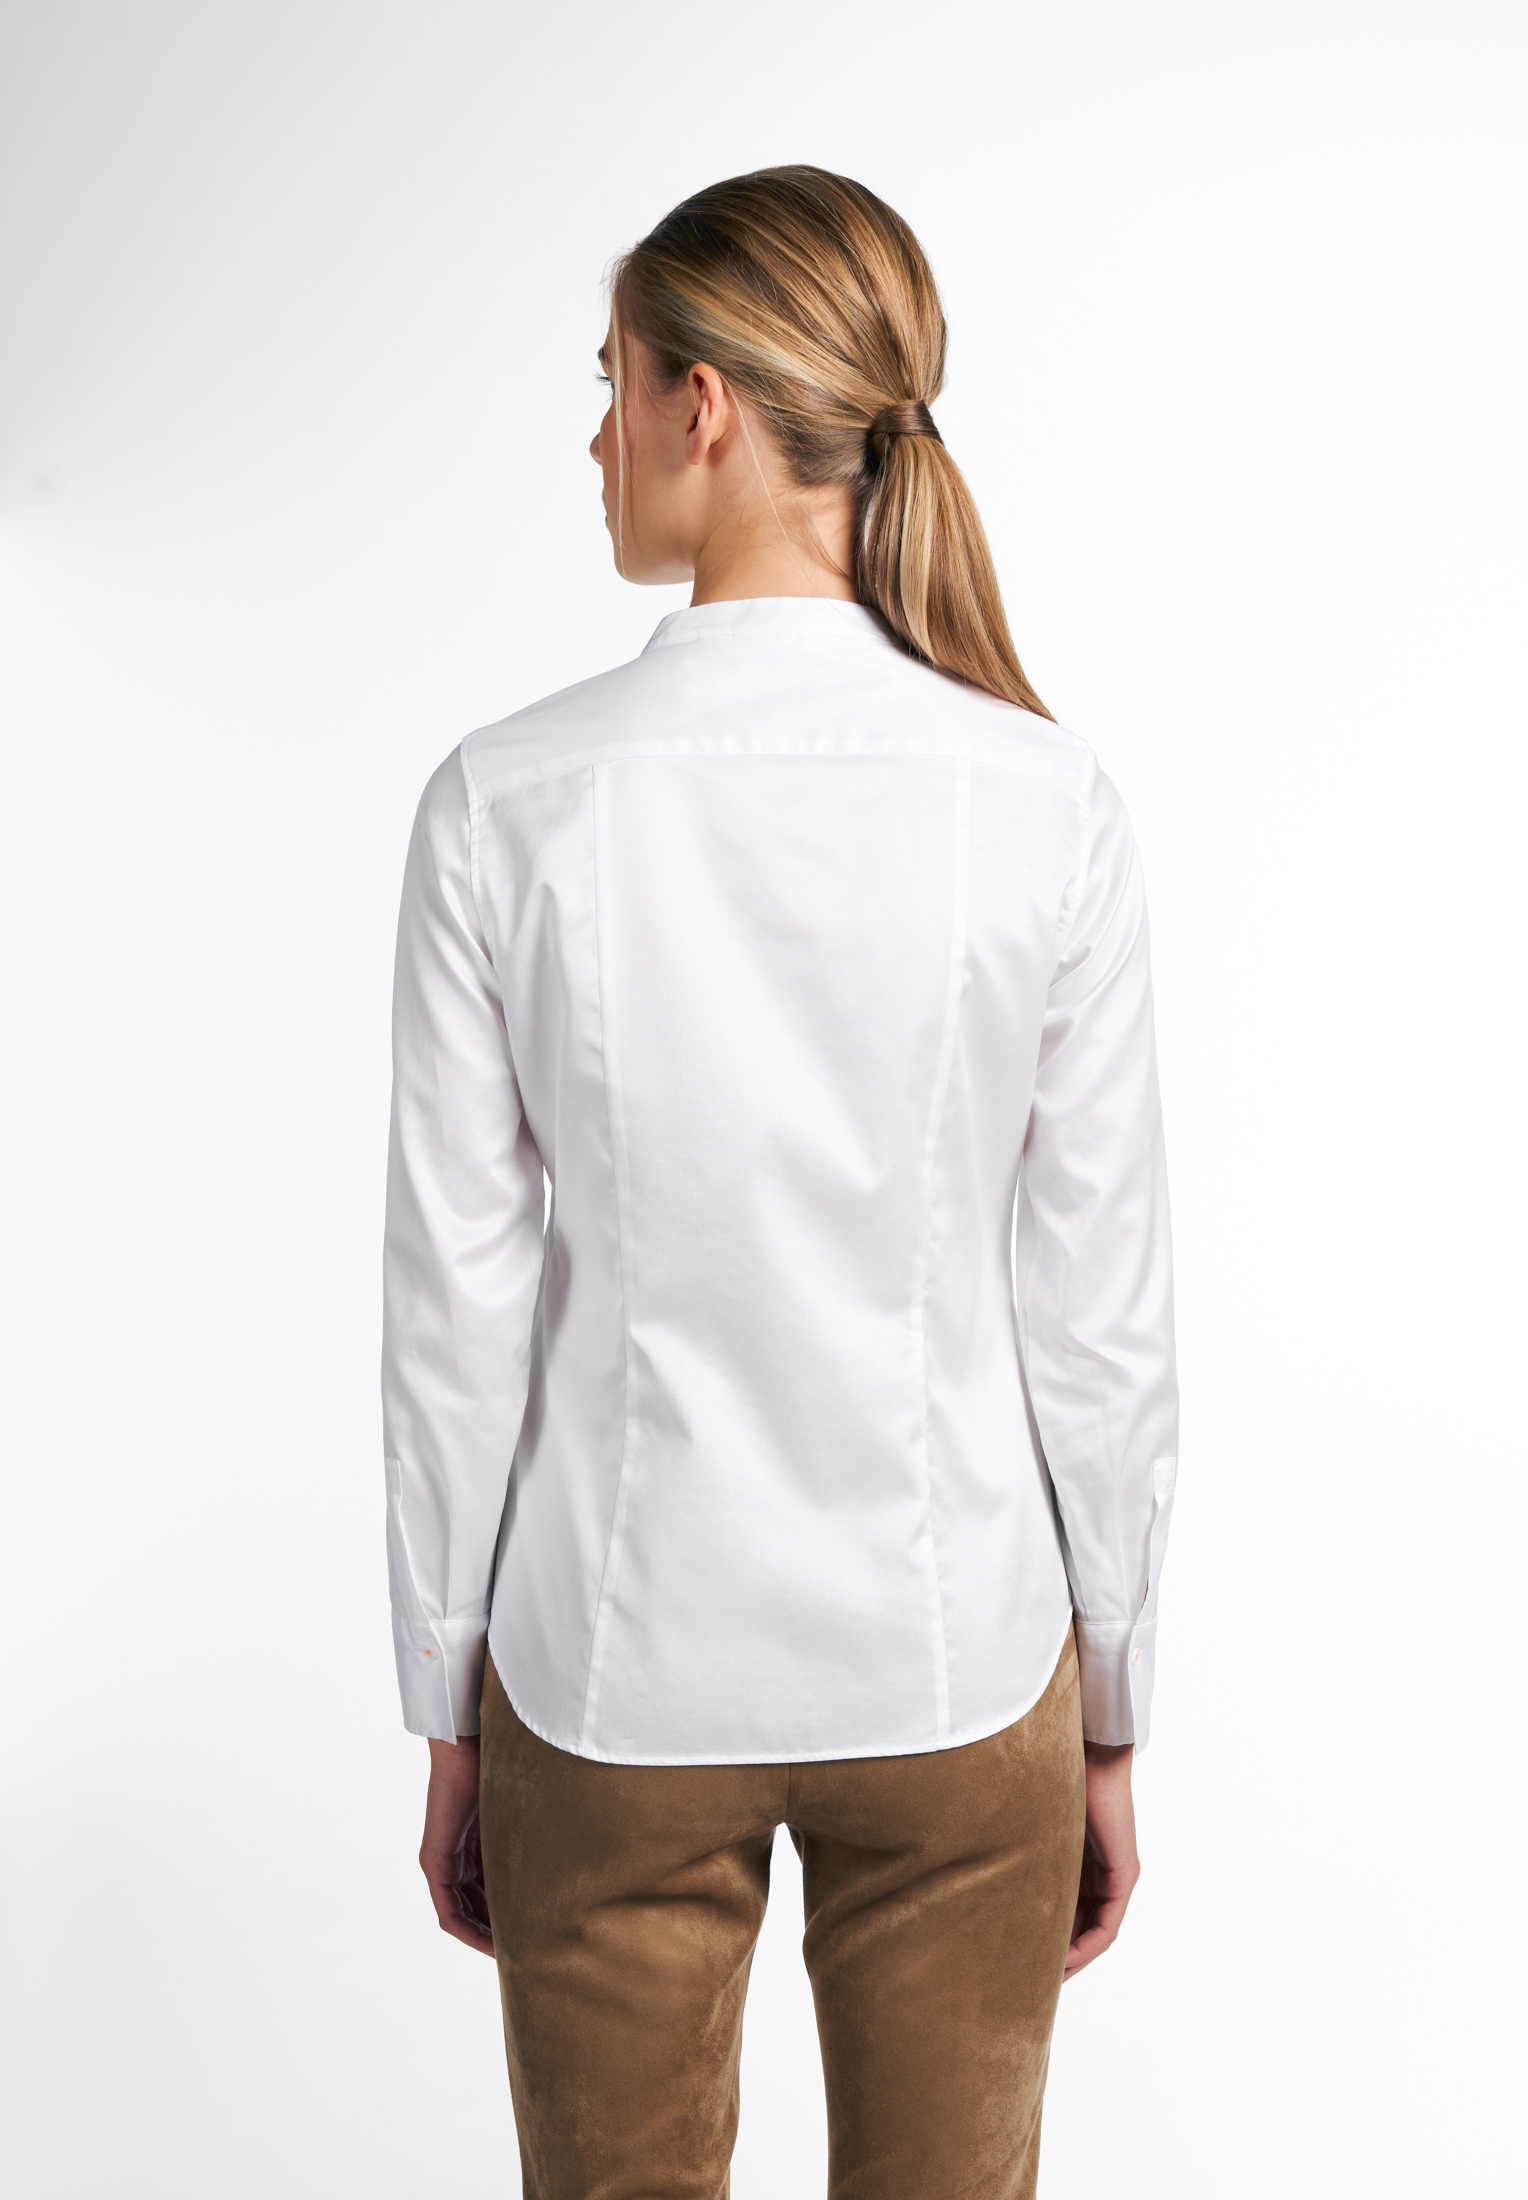 Luxury 38 off-white Bluse Soft | | | 2BL03742-00-02-38-1/1 | in Langarm Shirt off-white unifarben